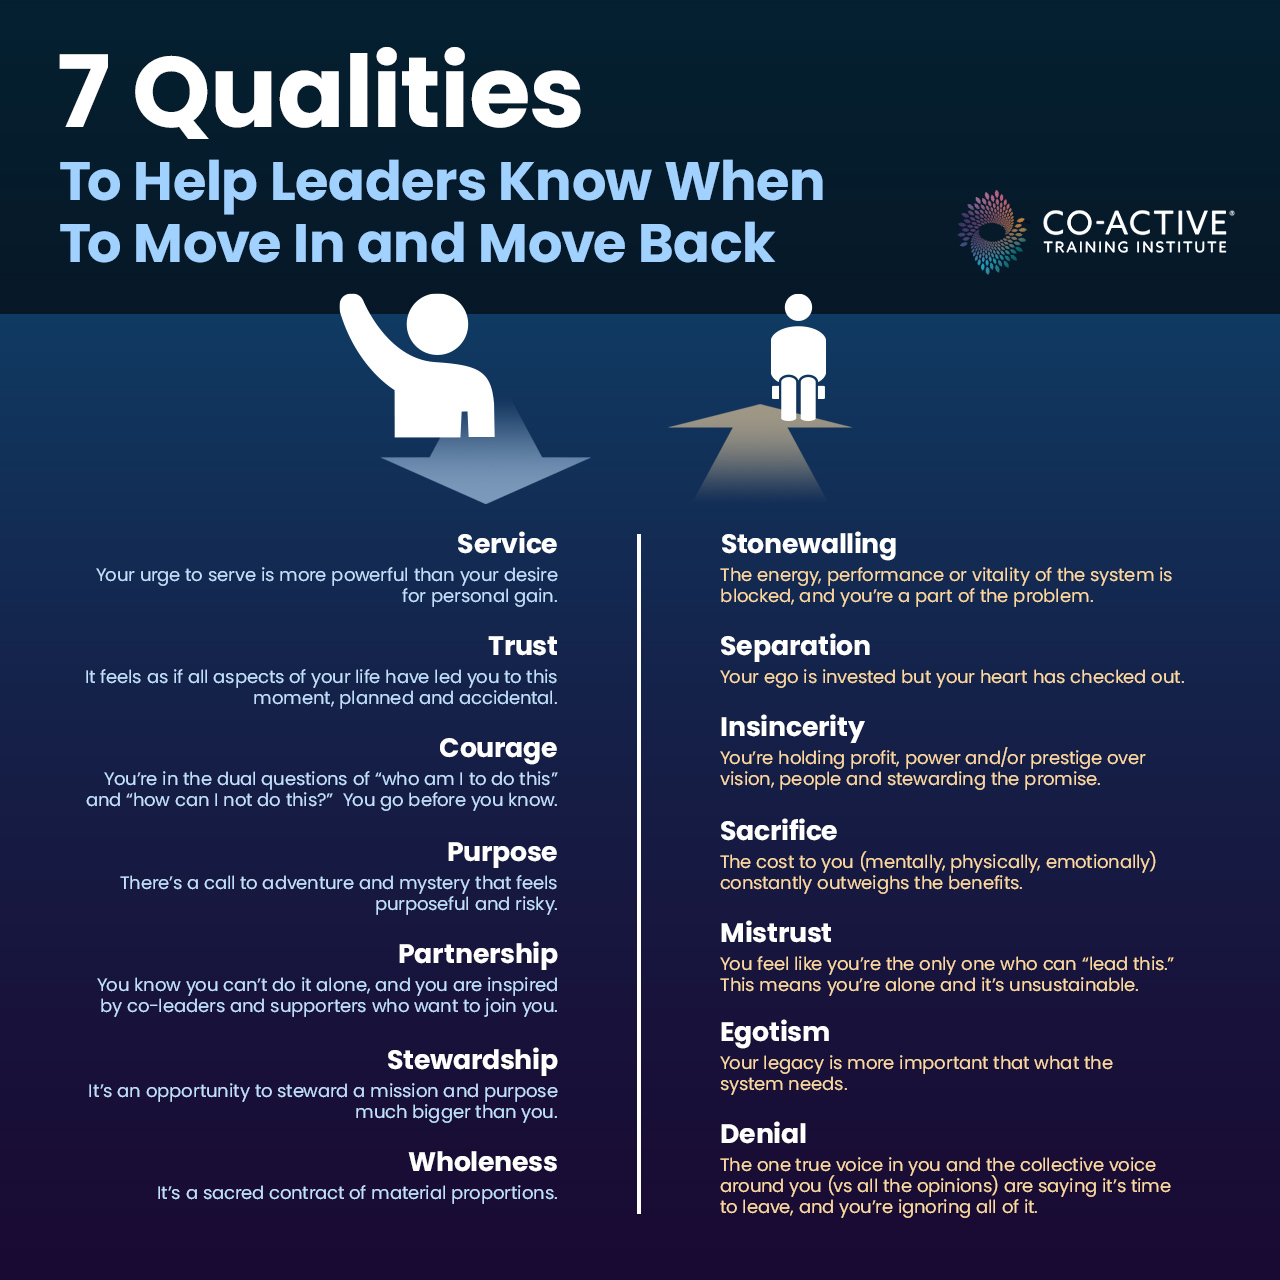 7 qualities to help leaders know when to move in and move back 